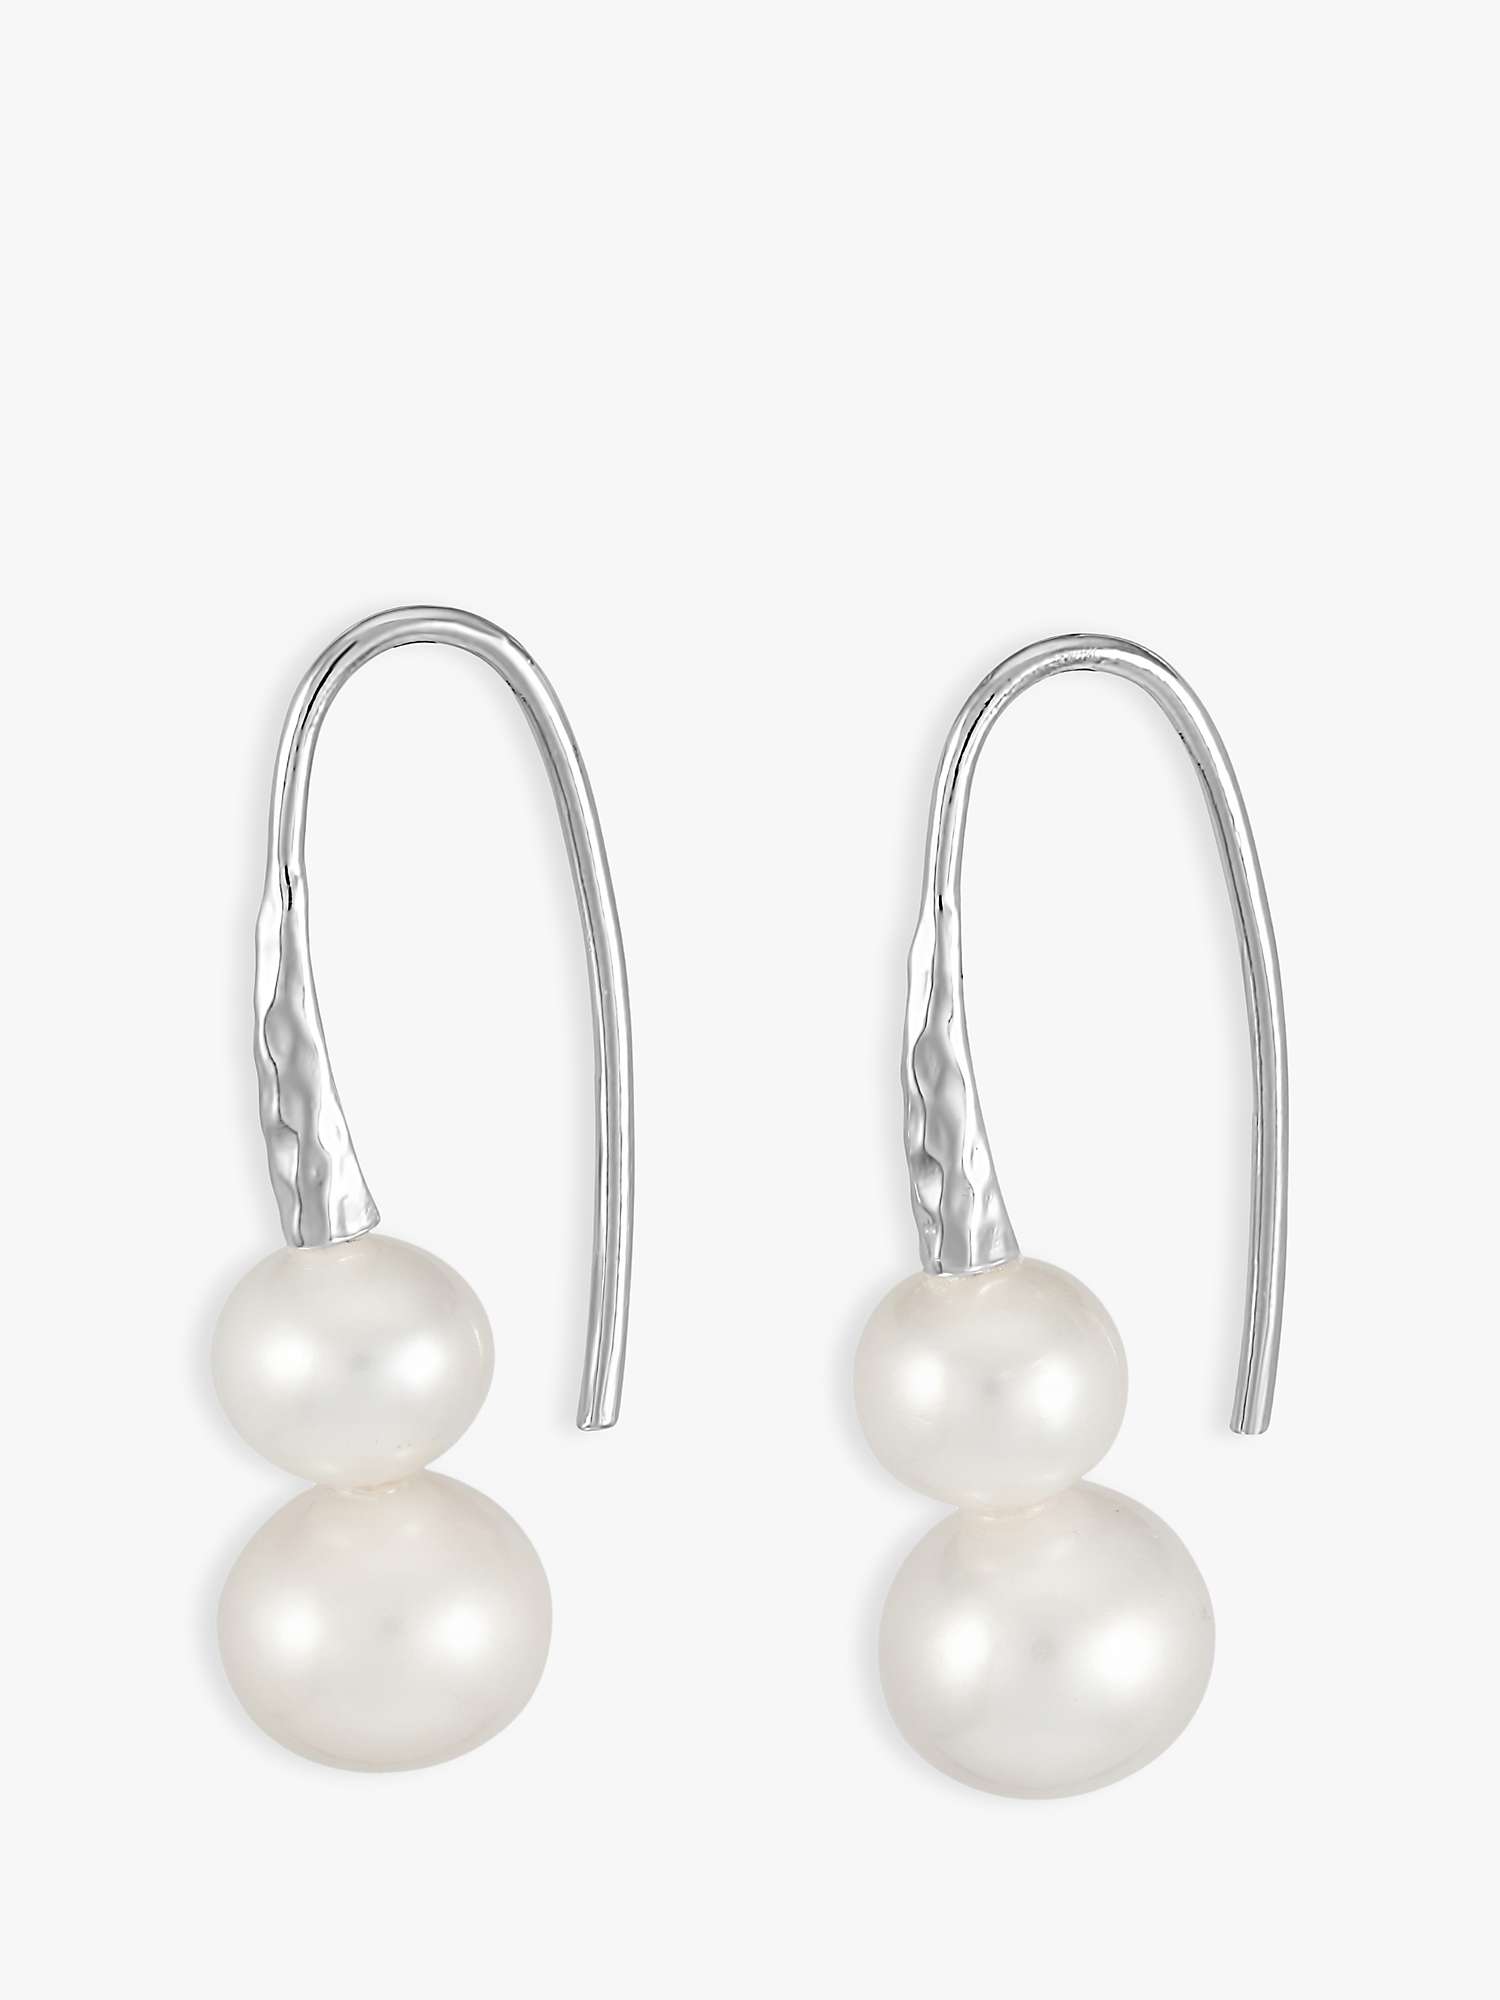 Buy Dower & Hall Double Freshwater Pearl Hook Drop Earrings, Silver/White Online at johnlewis.com